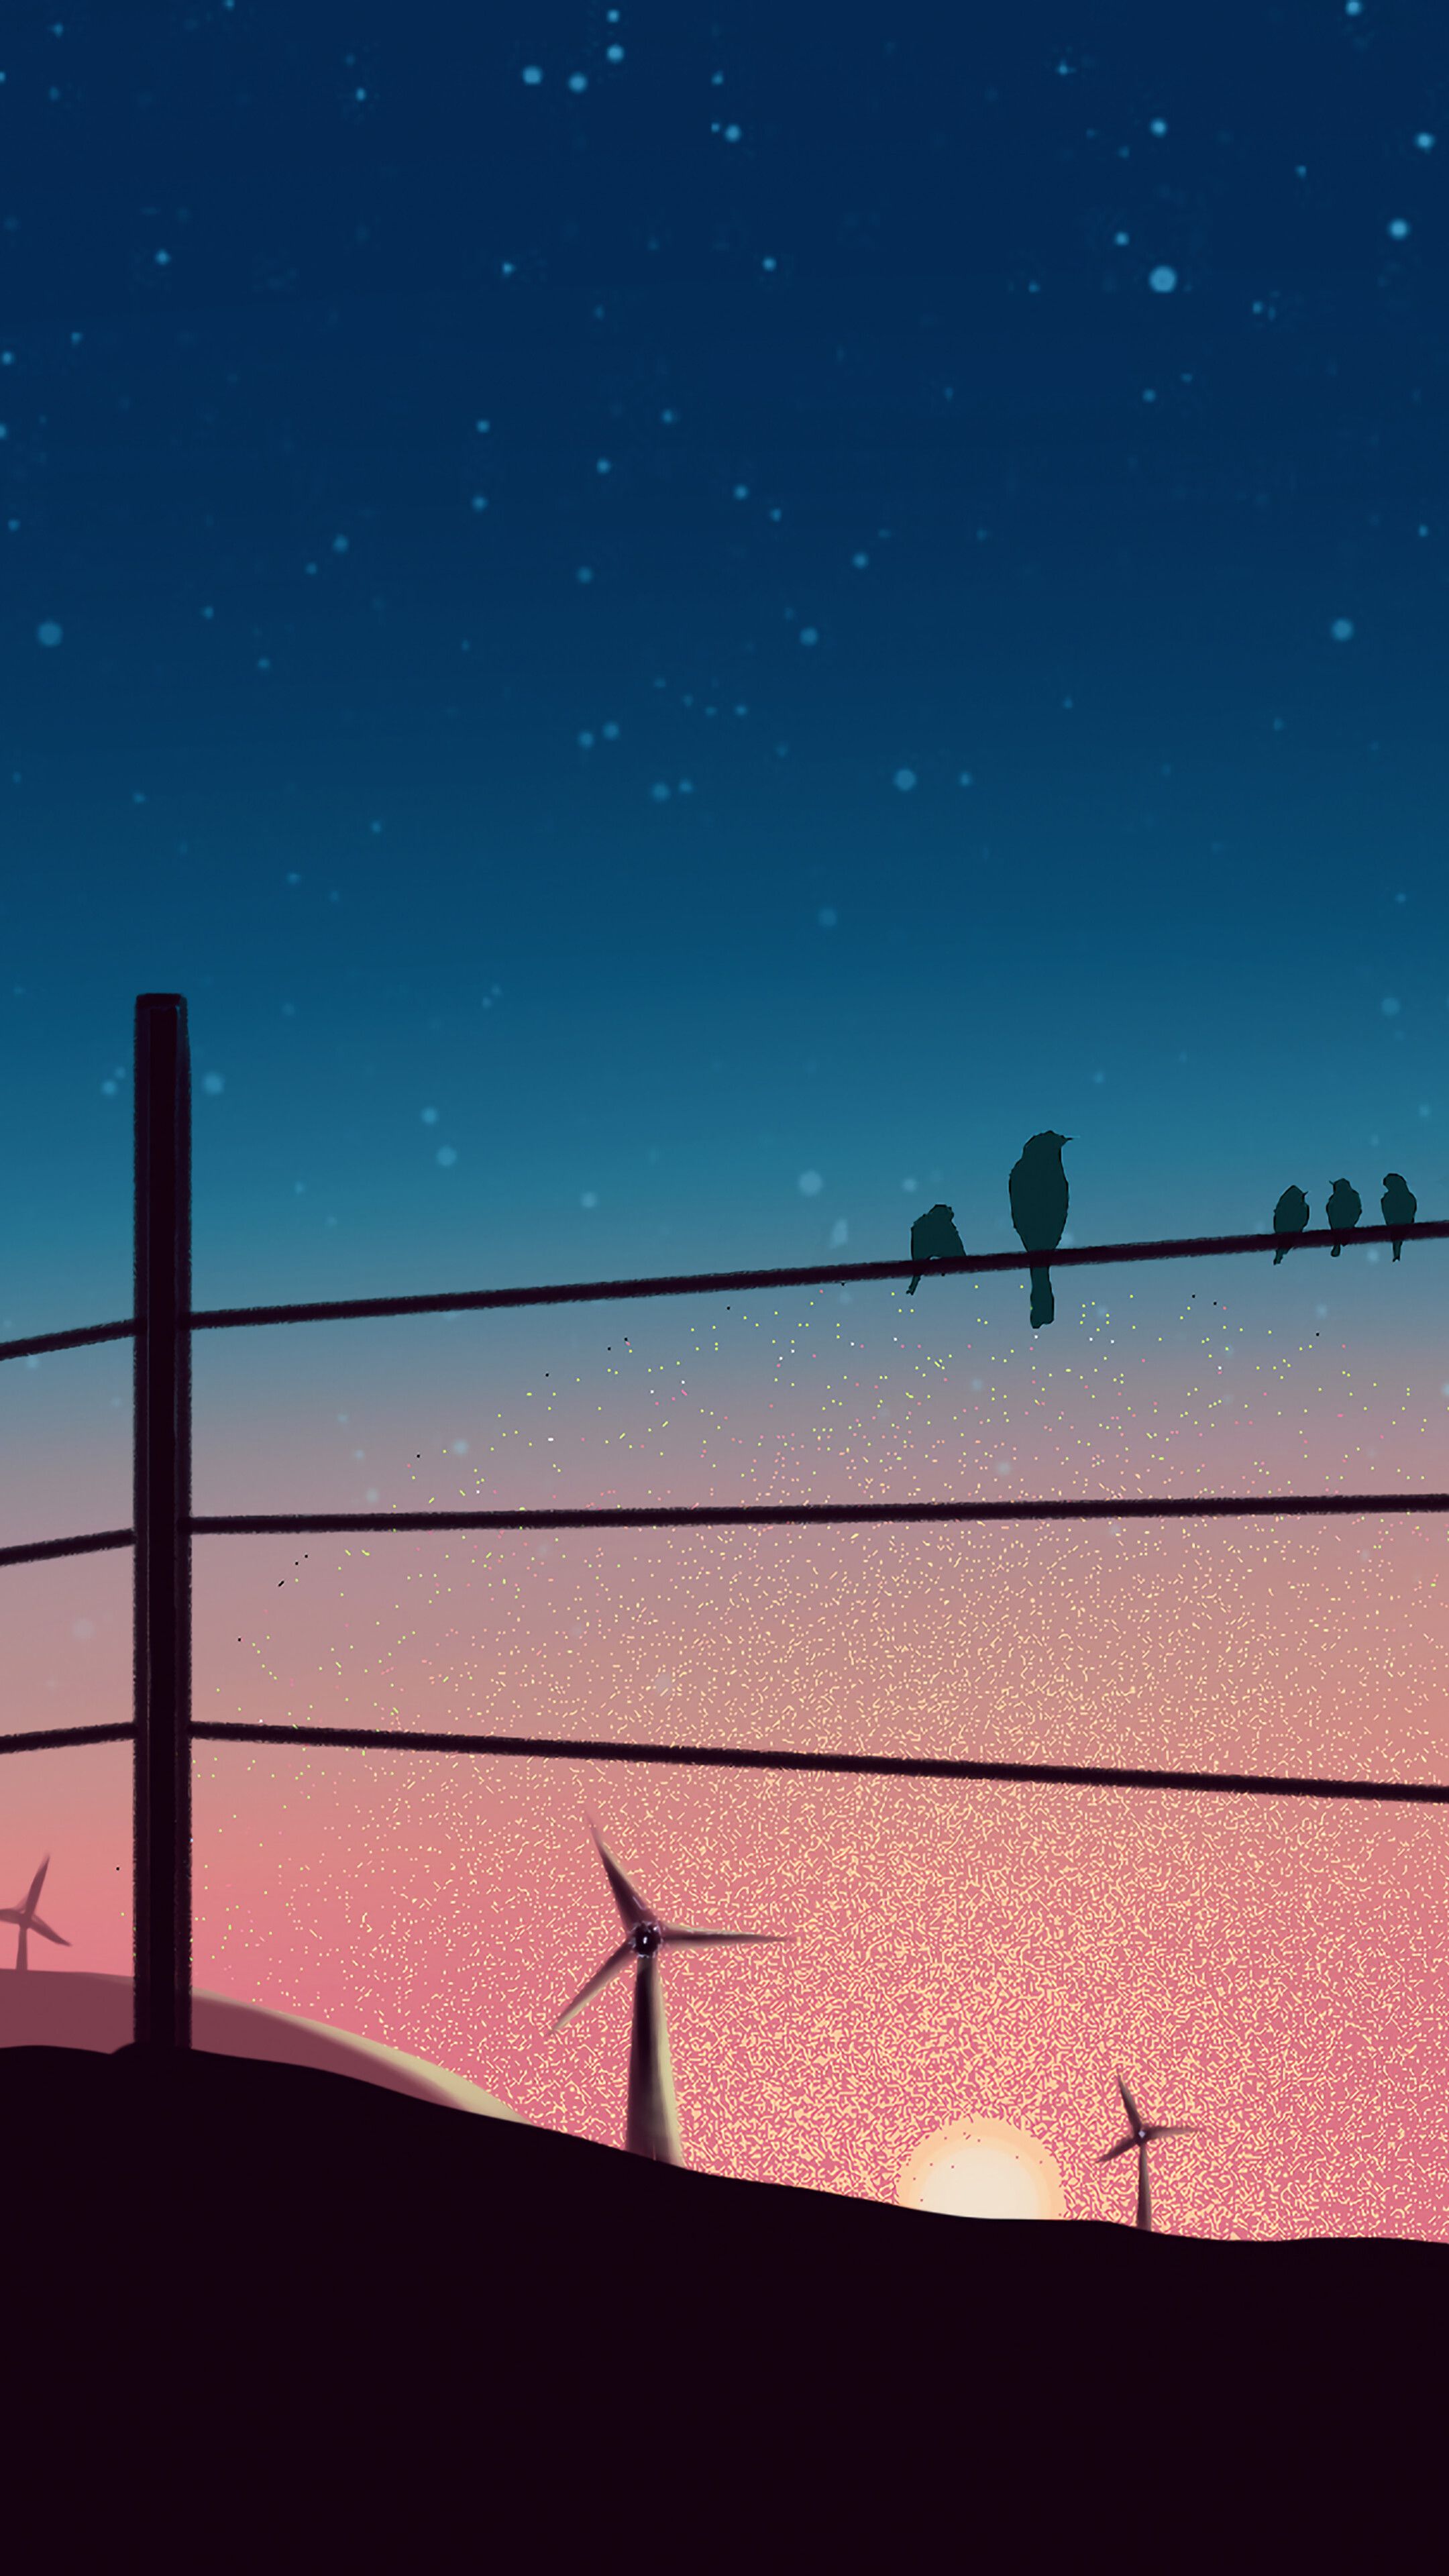 A fence with birds on it at sunset - Sunrise